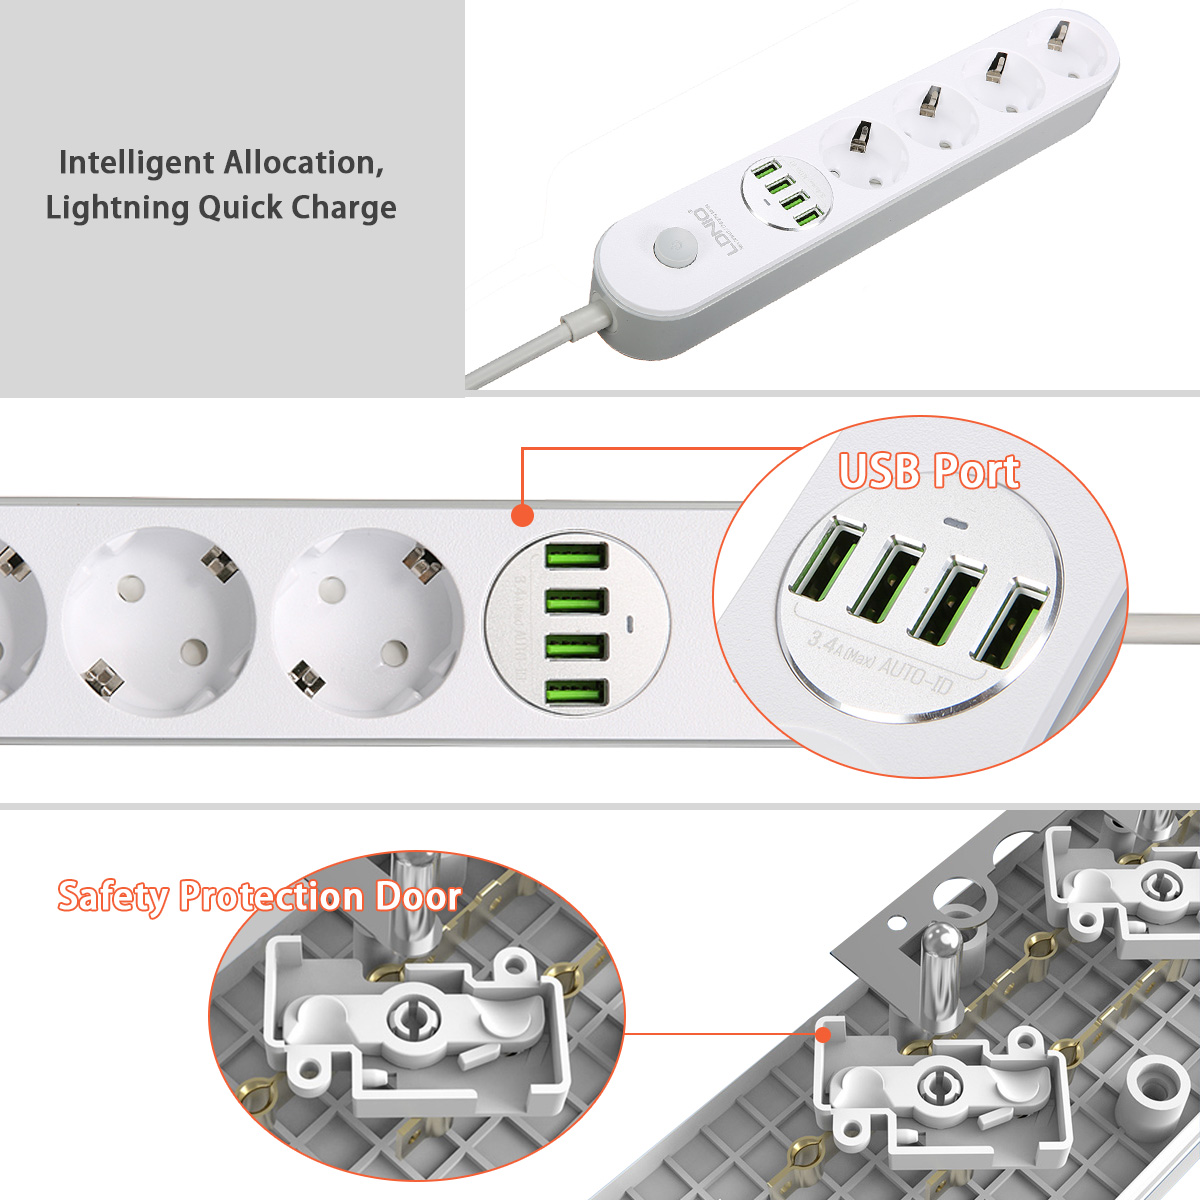 LDNIO-SE4432-Extension-Cord-Socket-Charger-With-4-USB-Ports--4-AC-Sockets-EU-Plug-Fast-Charging-For--1135687-2